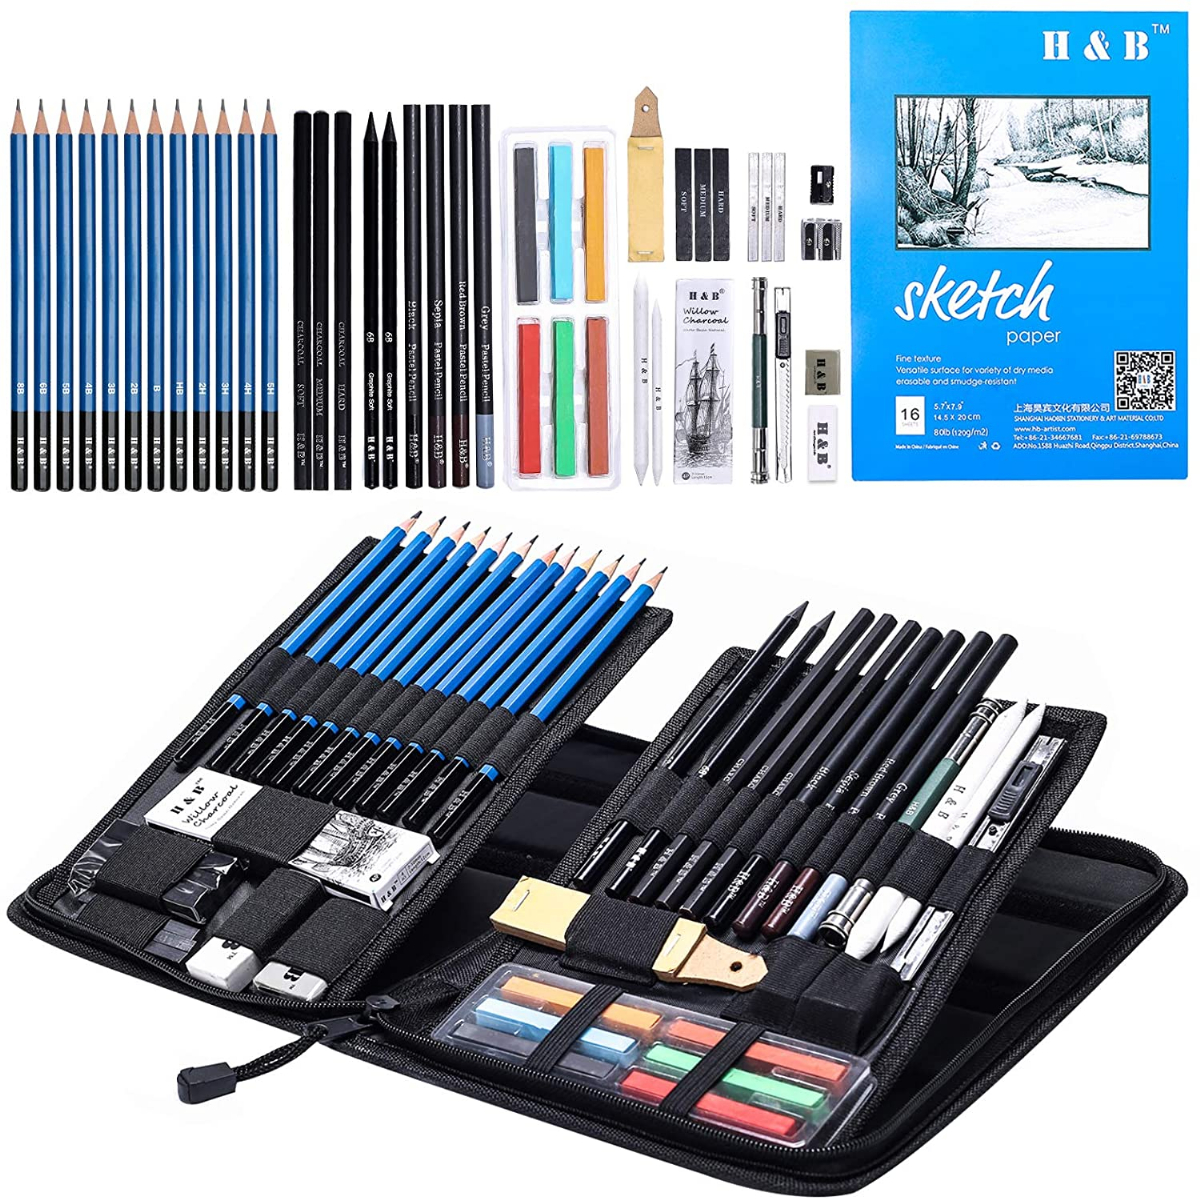 Canvas Pencil Bag and Accessories Charcoal Pencils Sketching Pencil Set 18 Pieces Drawing Pencil Sketch Pencils Set for Artists Adults children Beginners Include Pencils